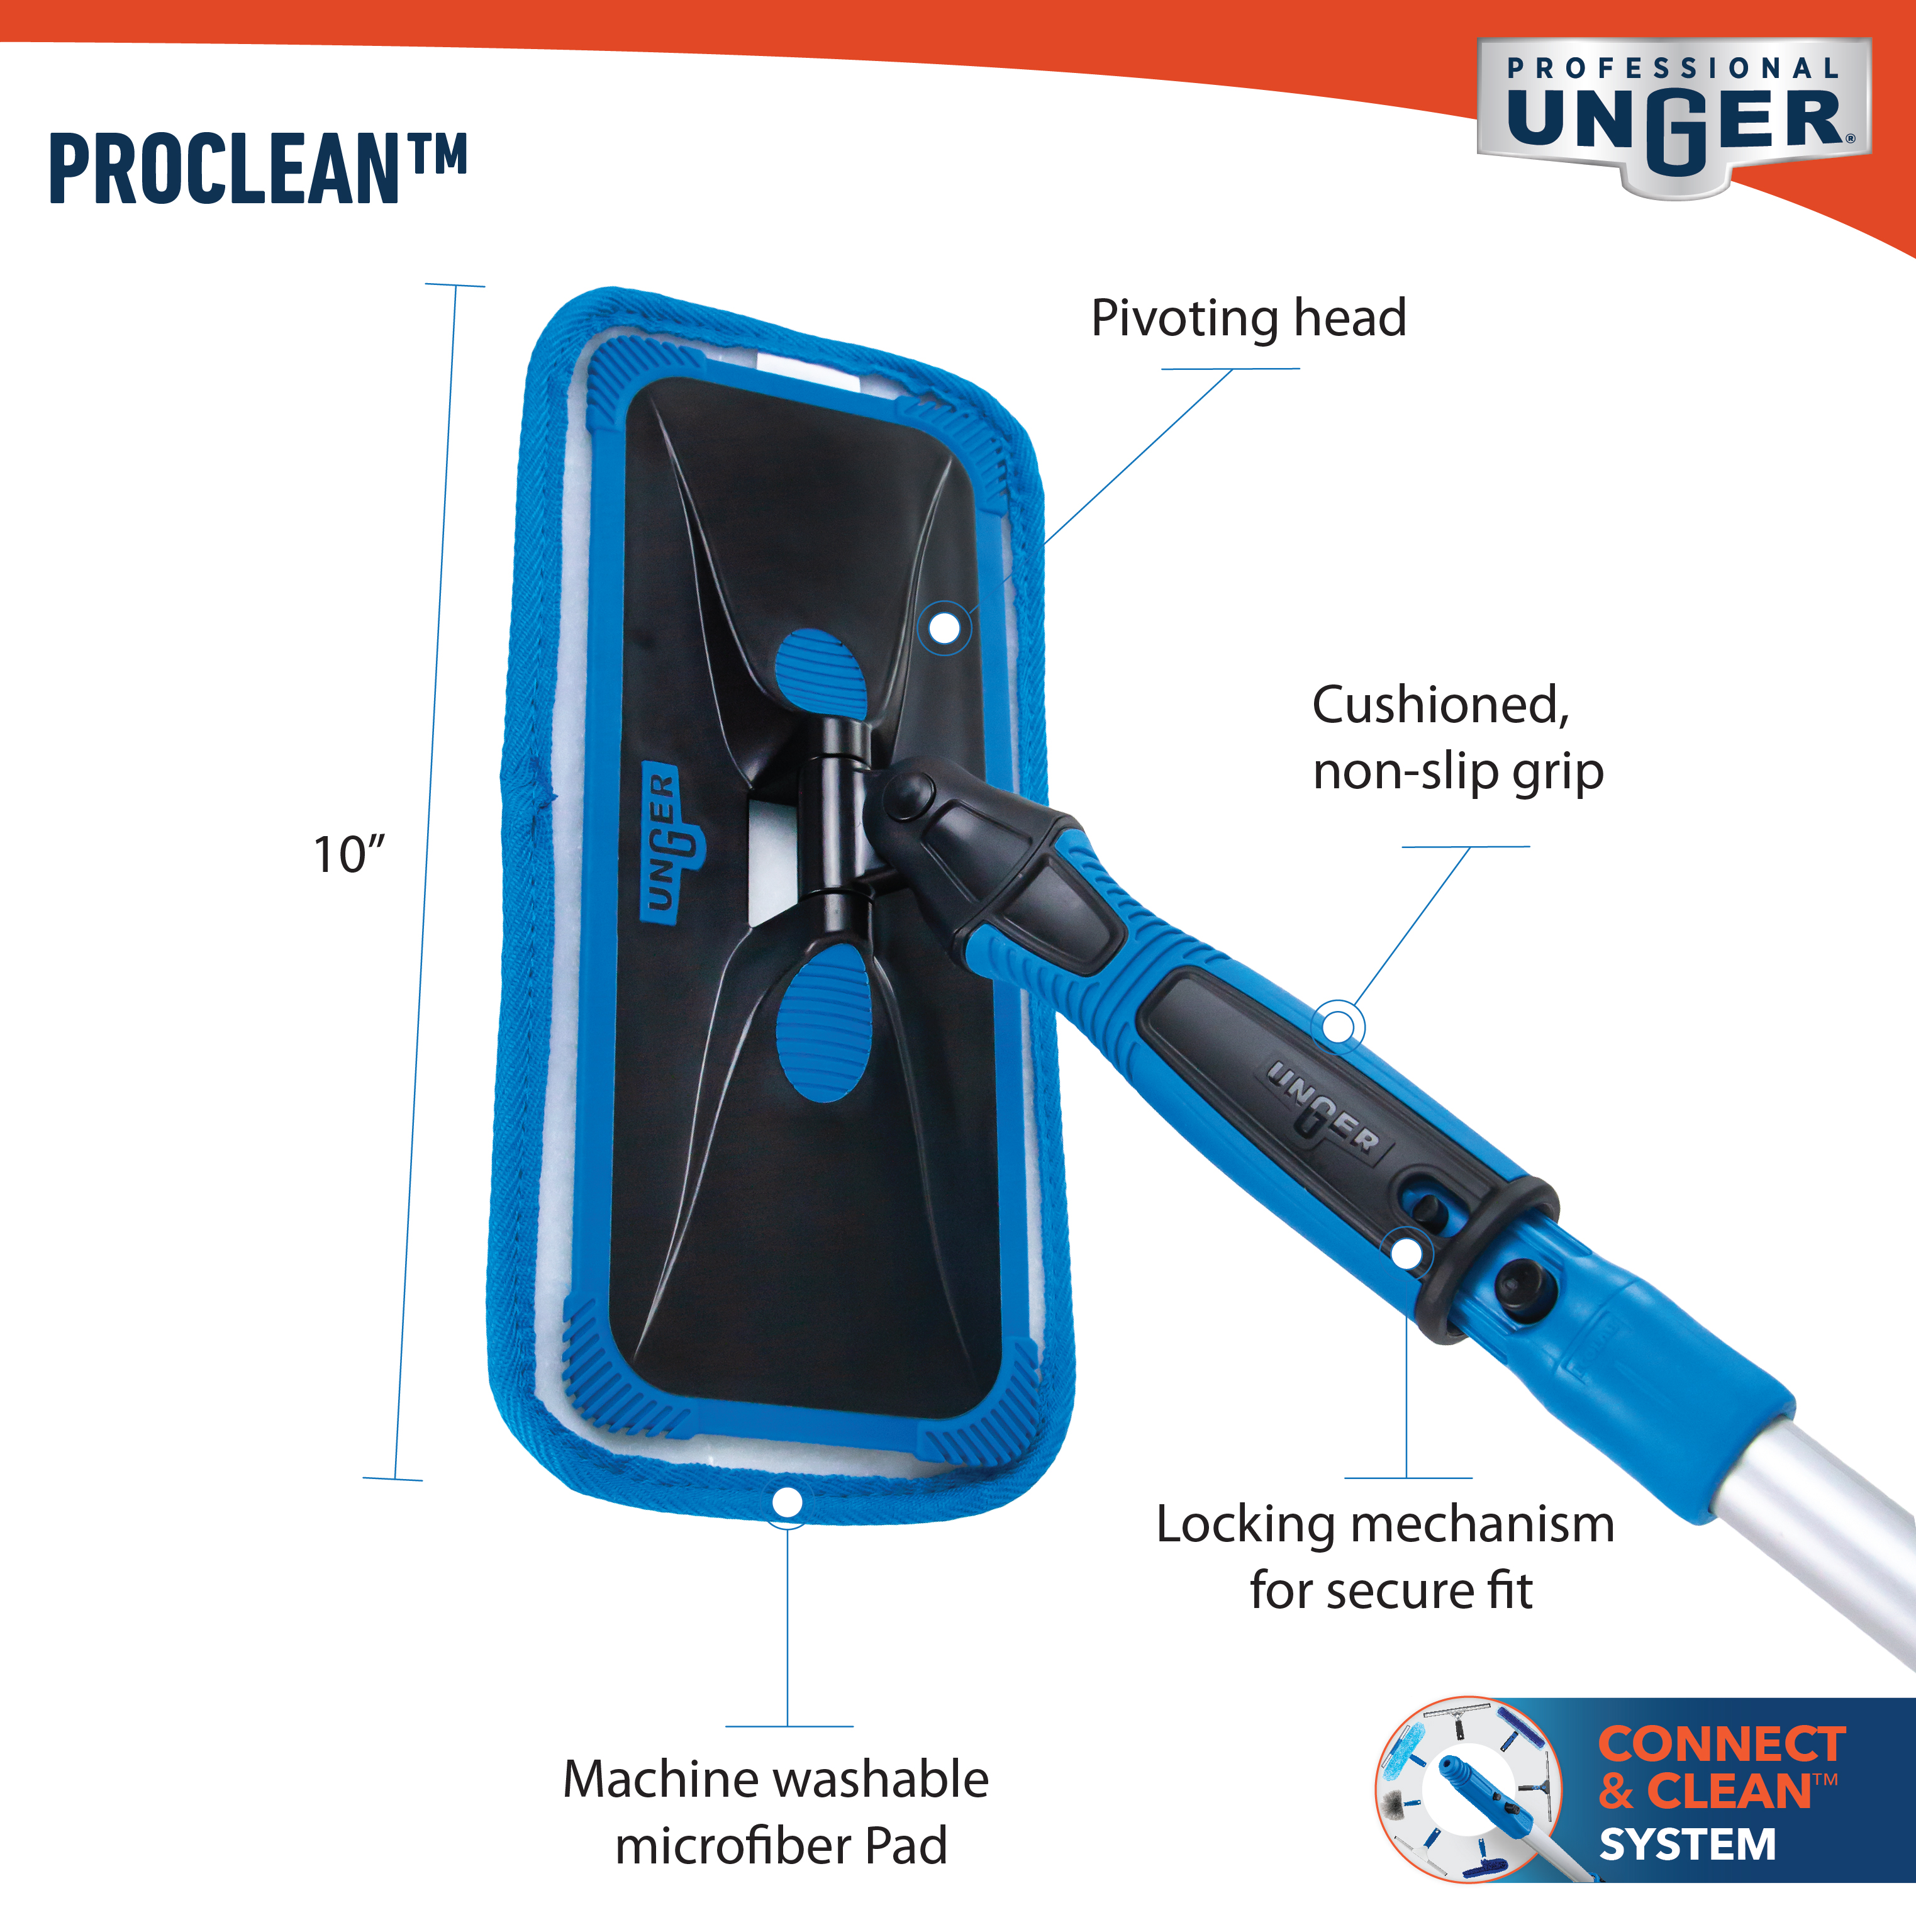 980300_UI_Unger Pro_ProClean_Infographic Feature 1